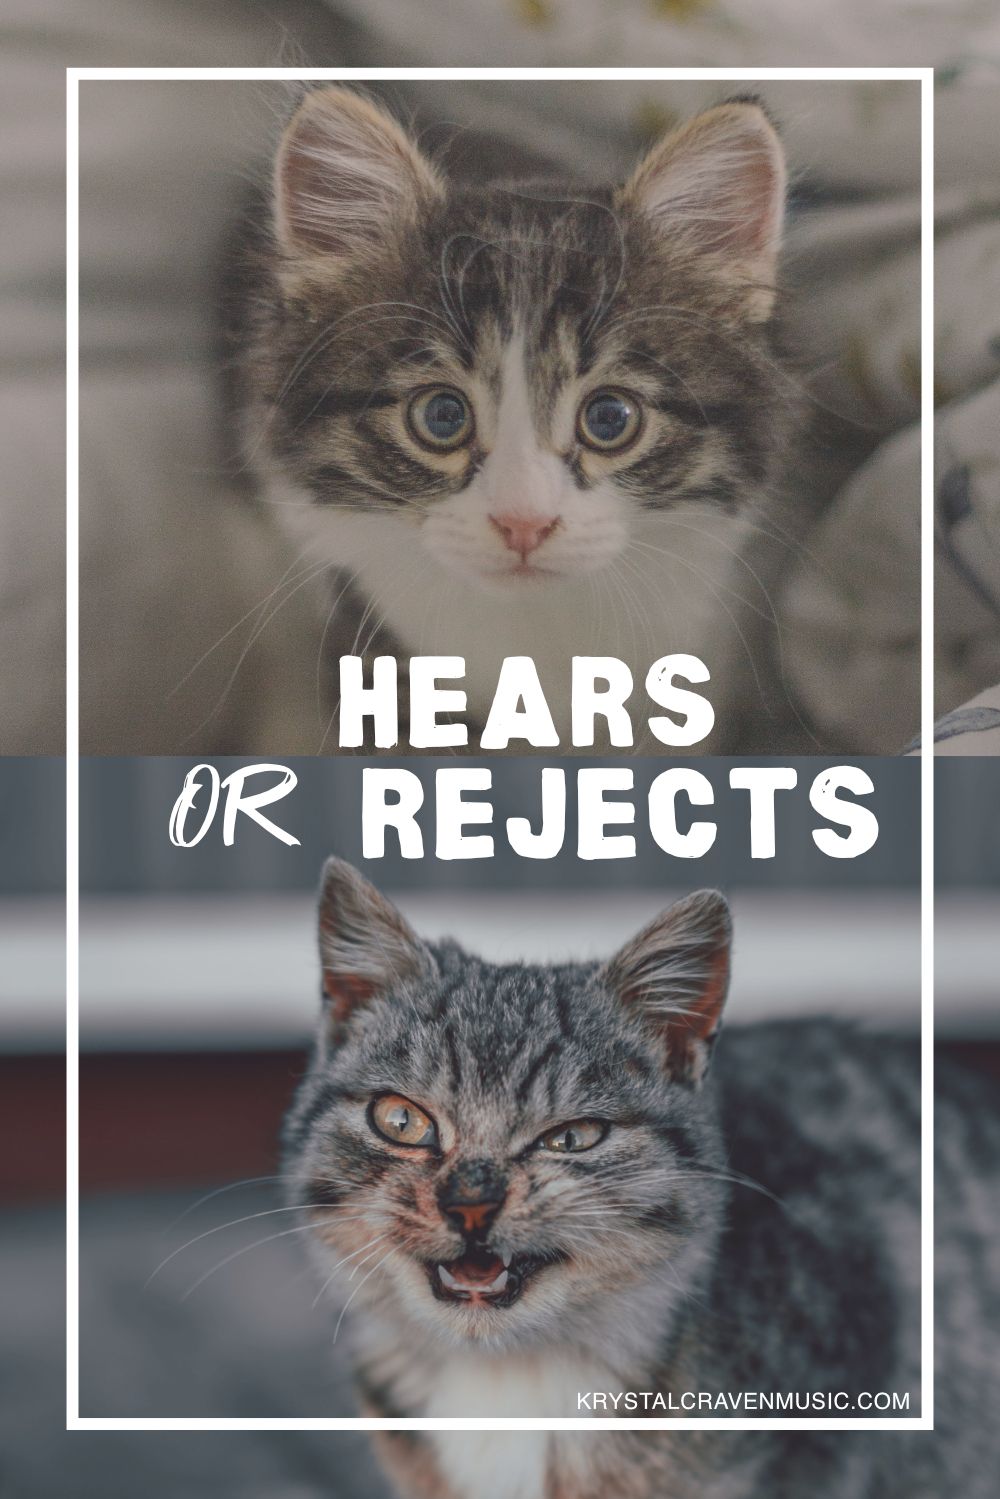 The title text "Hears or Rejects" in a large white font overlaying pictures of two different cats, one peacful and the other hissing.